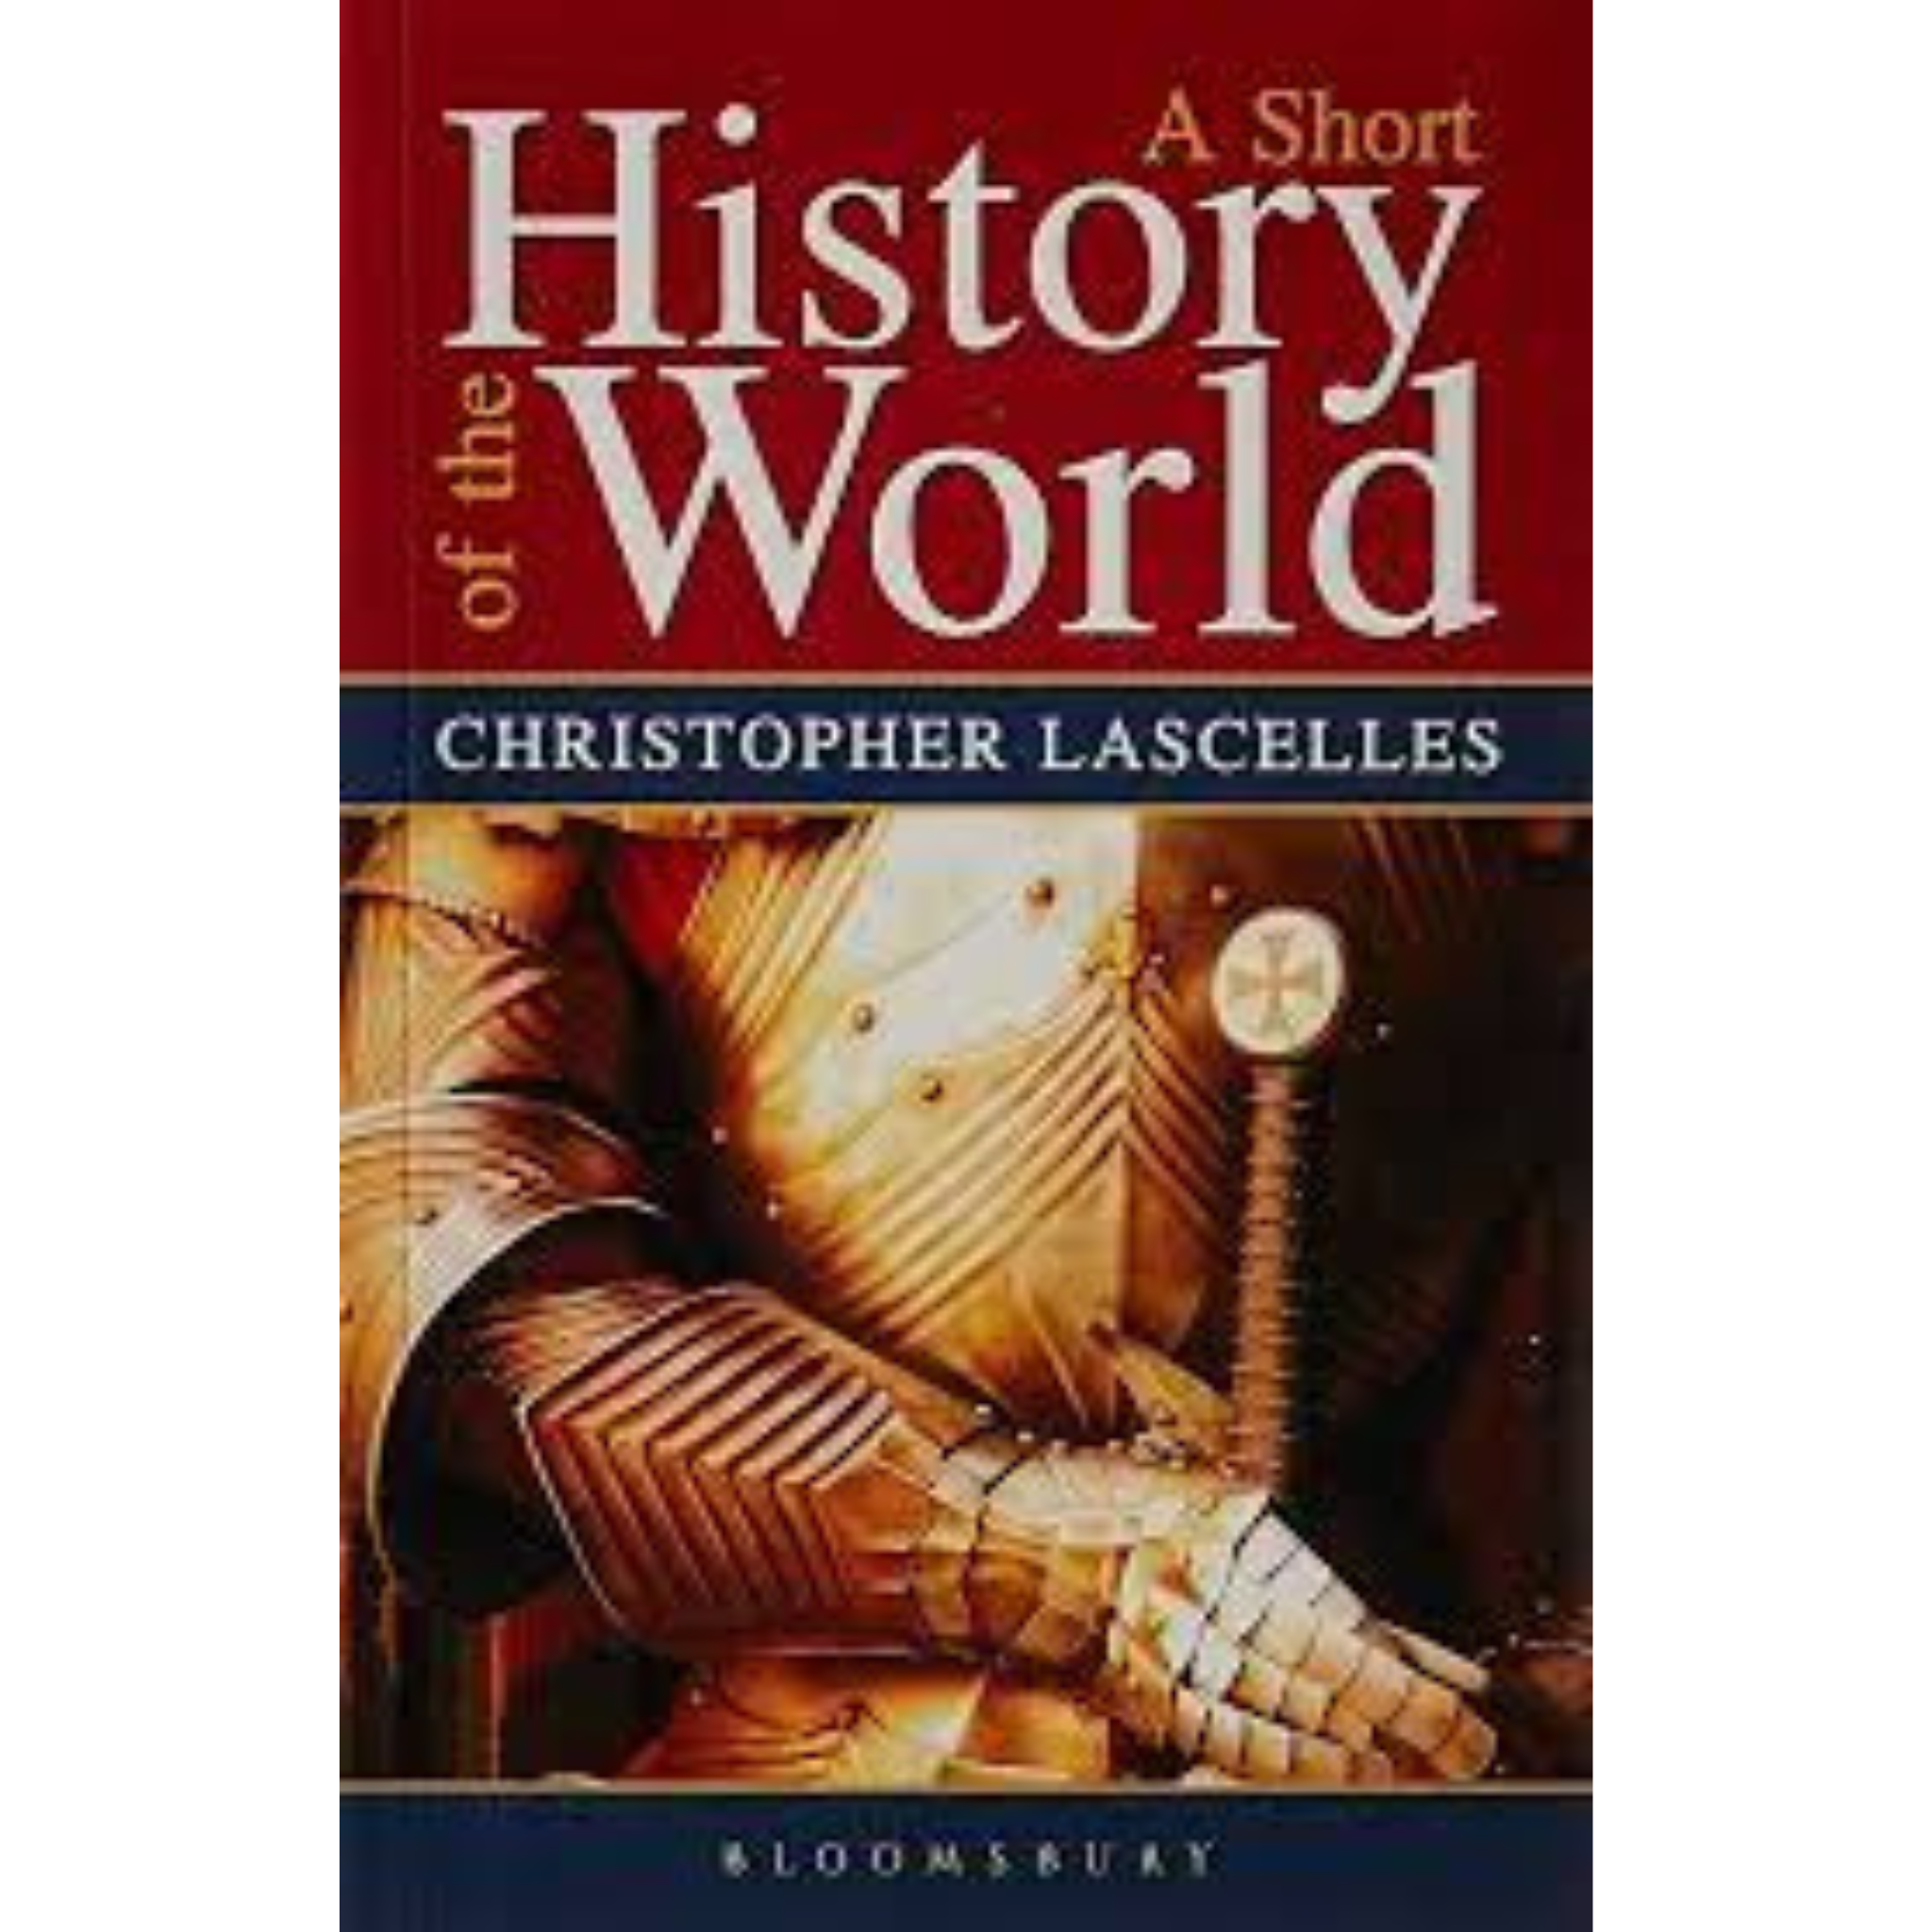 A Short History Of The World By Christopher Lascelles